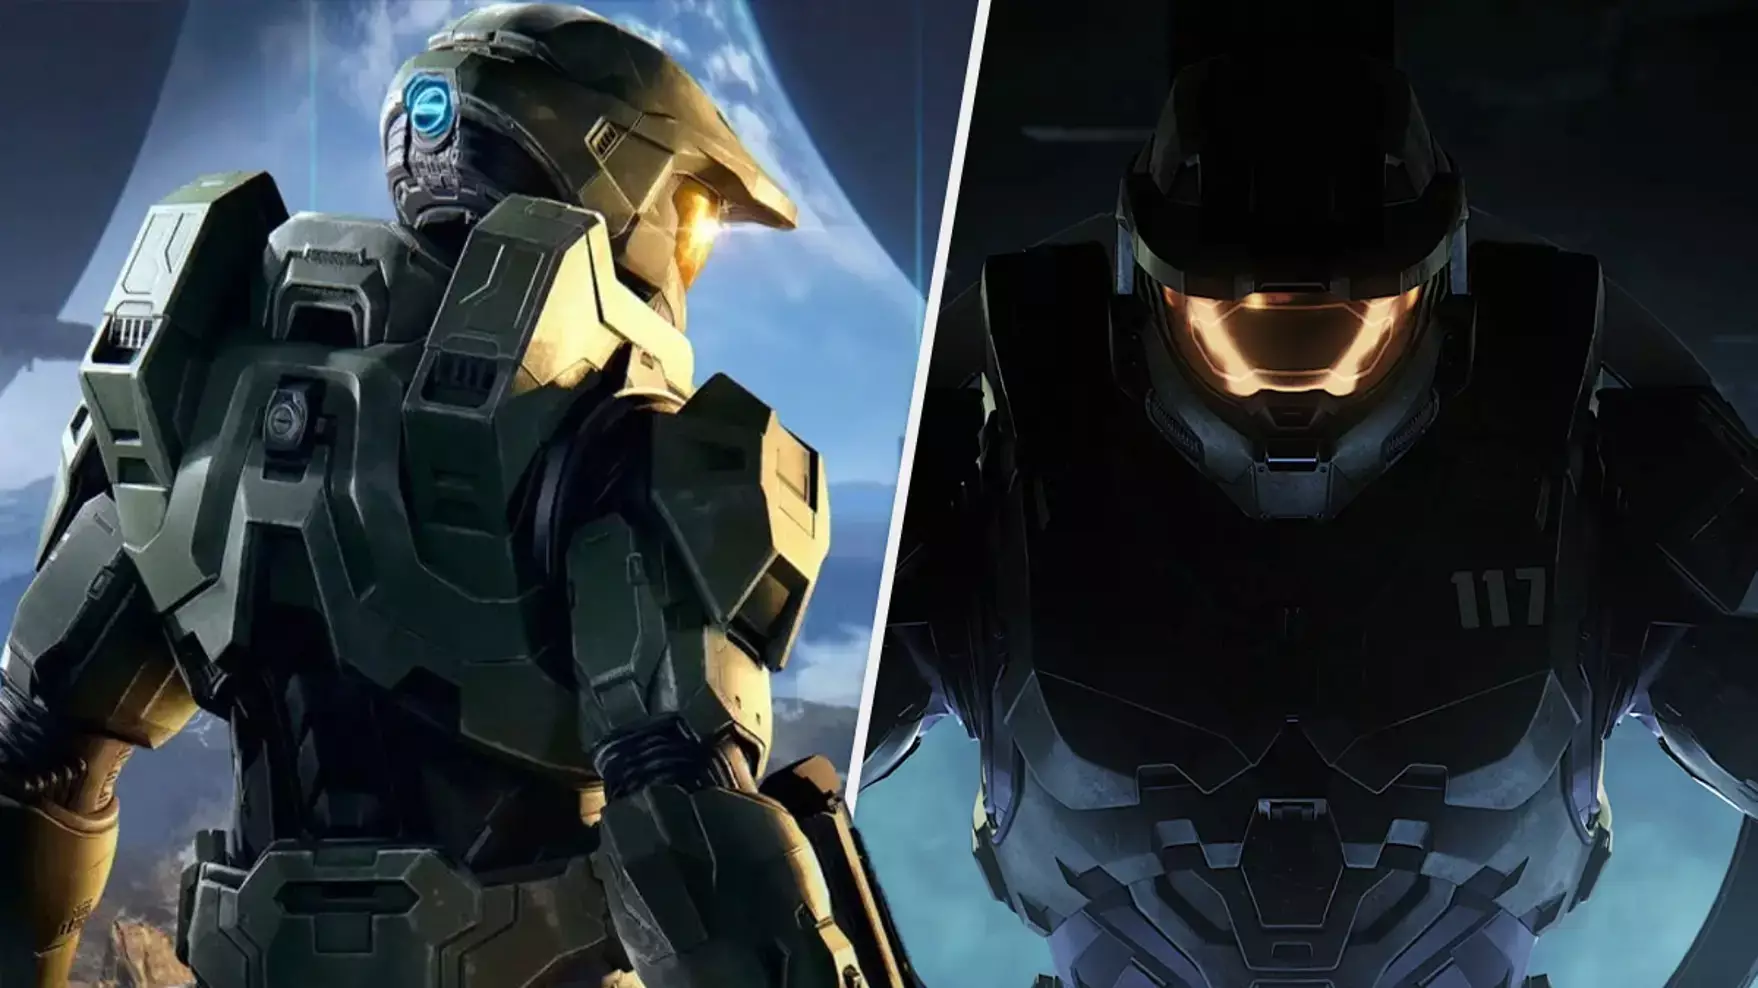 Halo TV Series Leaked Image Shows First Look At Master Chief